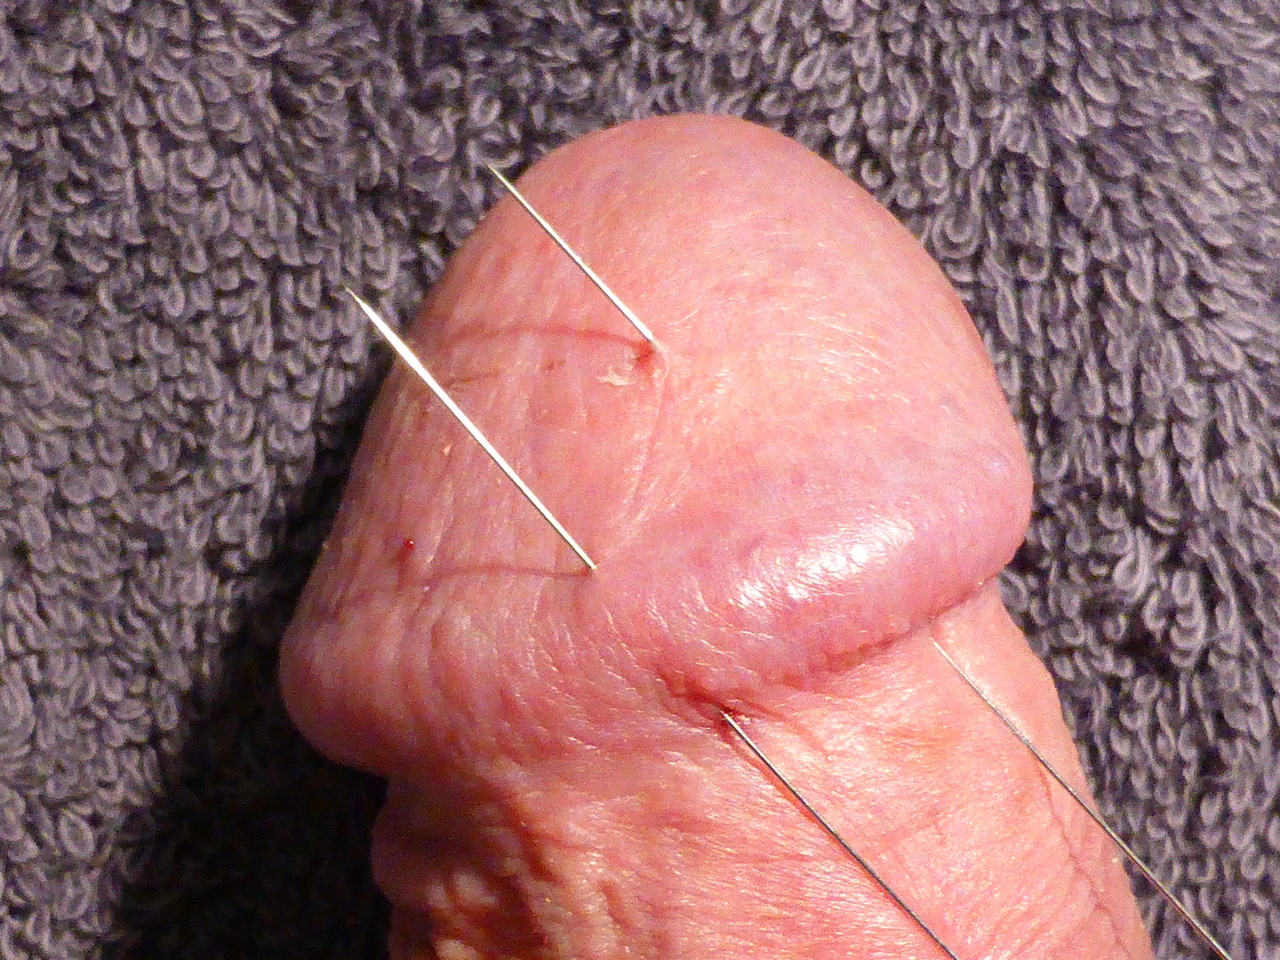 CBT - Acupuncture Needles